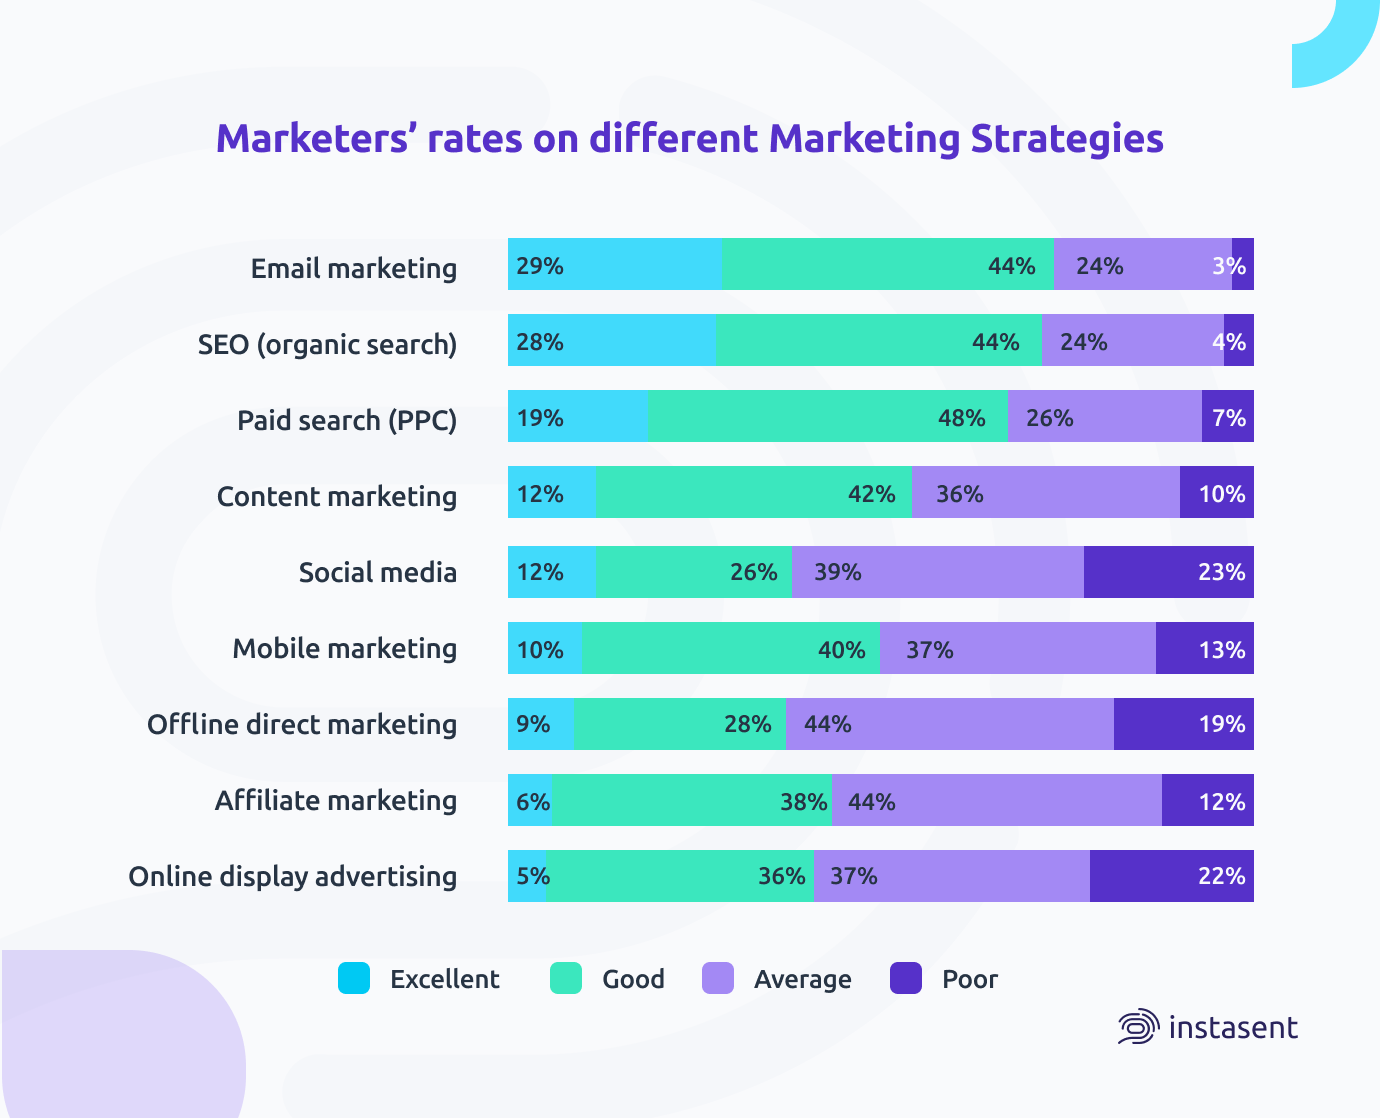 What marketers think of each marketing strategy